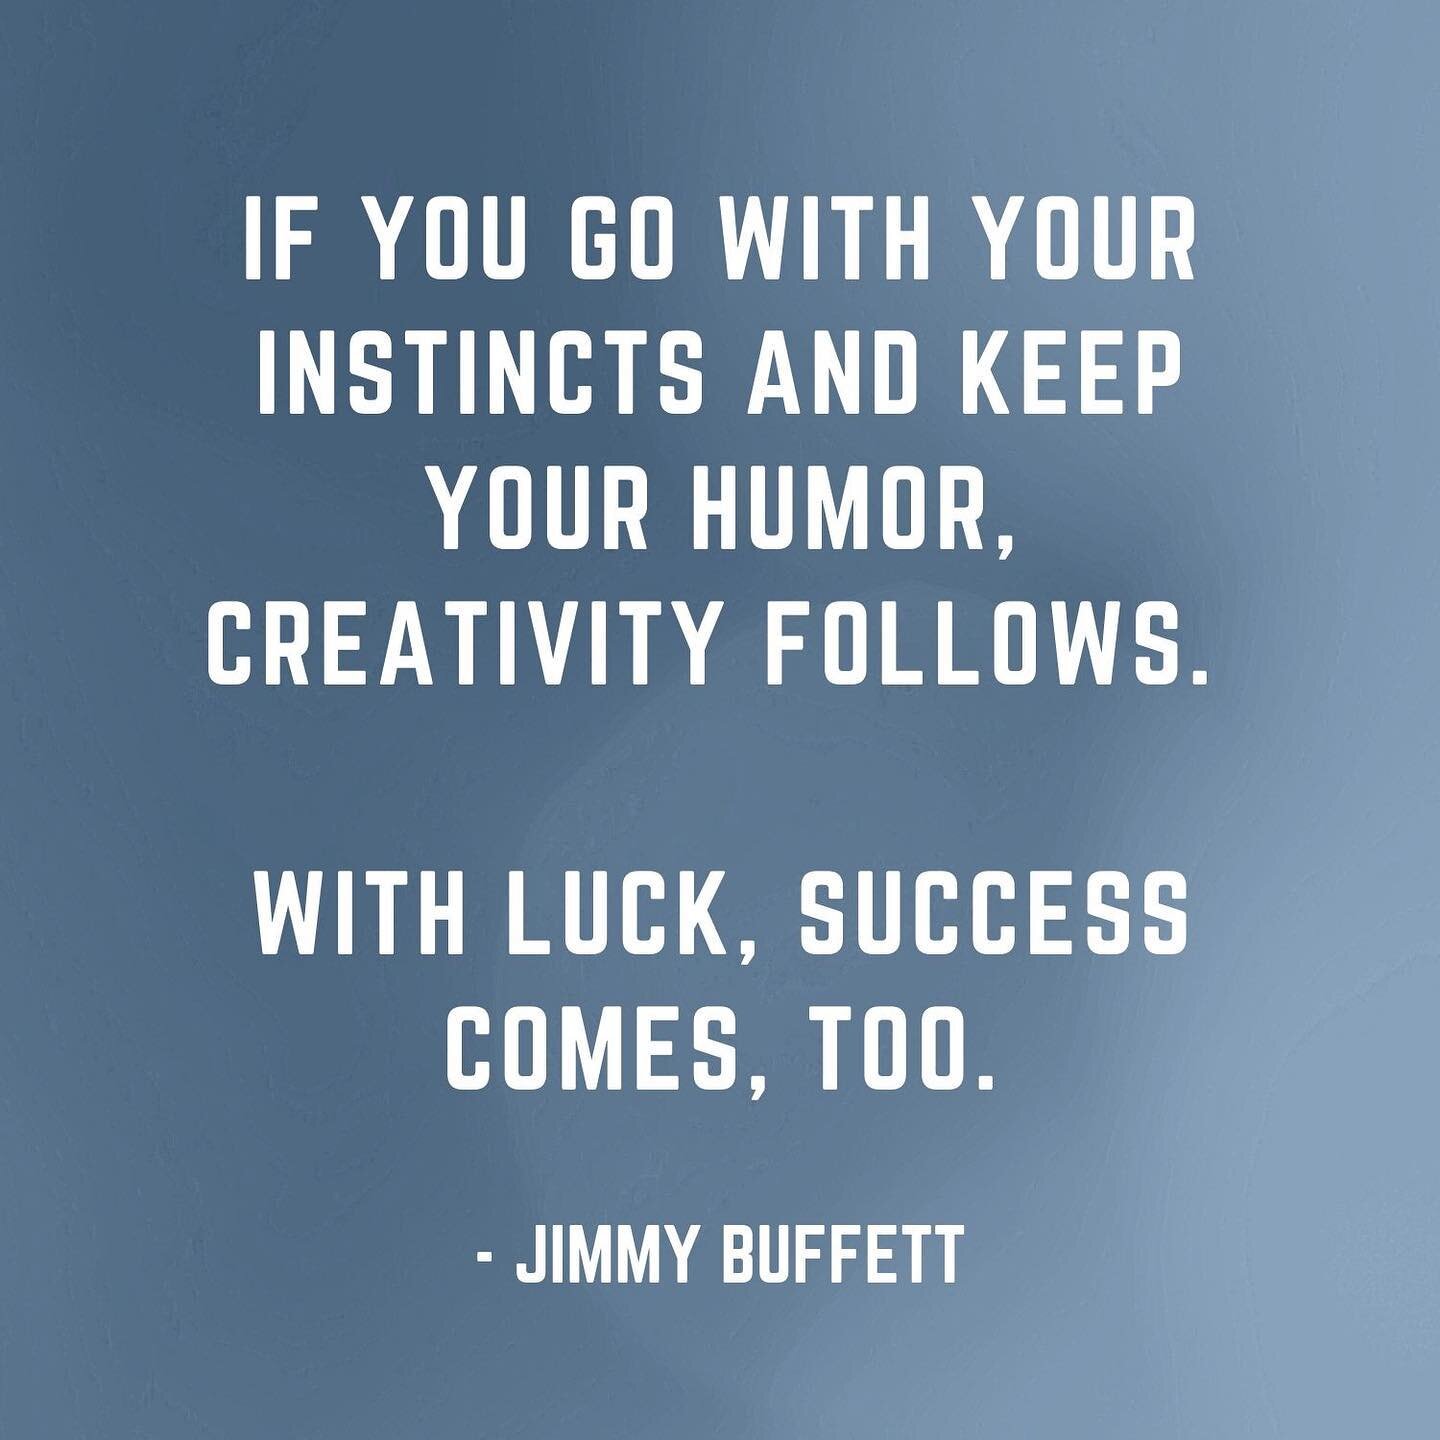 🍹Trust in Jimmy.

🦜He&rsquo;s always been known for his good advice. 

#jimmybuffett #trustyourinstincts #creativityquotes #successsecrets #bozemanphotographer #bozeman #personalbrandingphotography #marketyourself